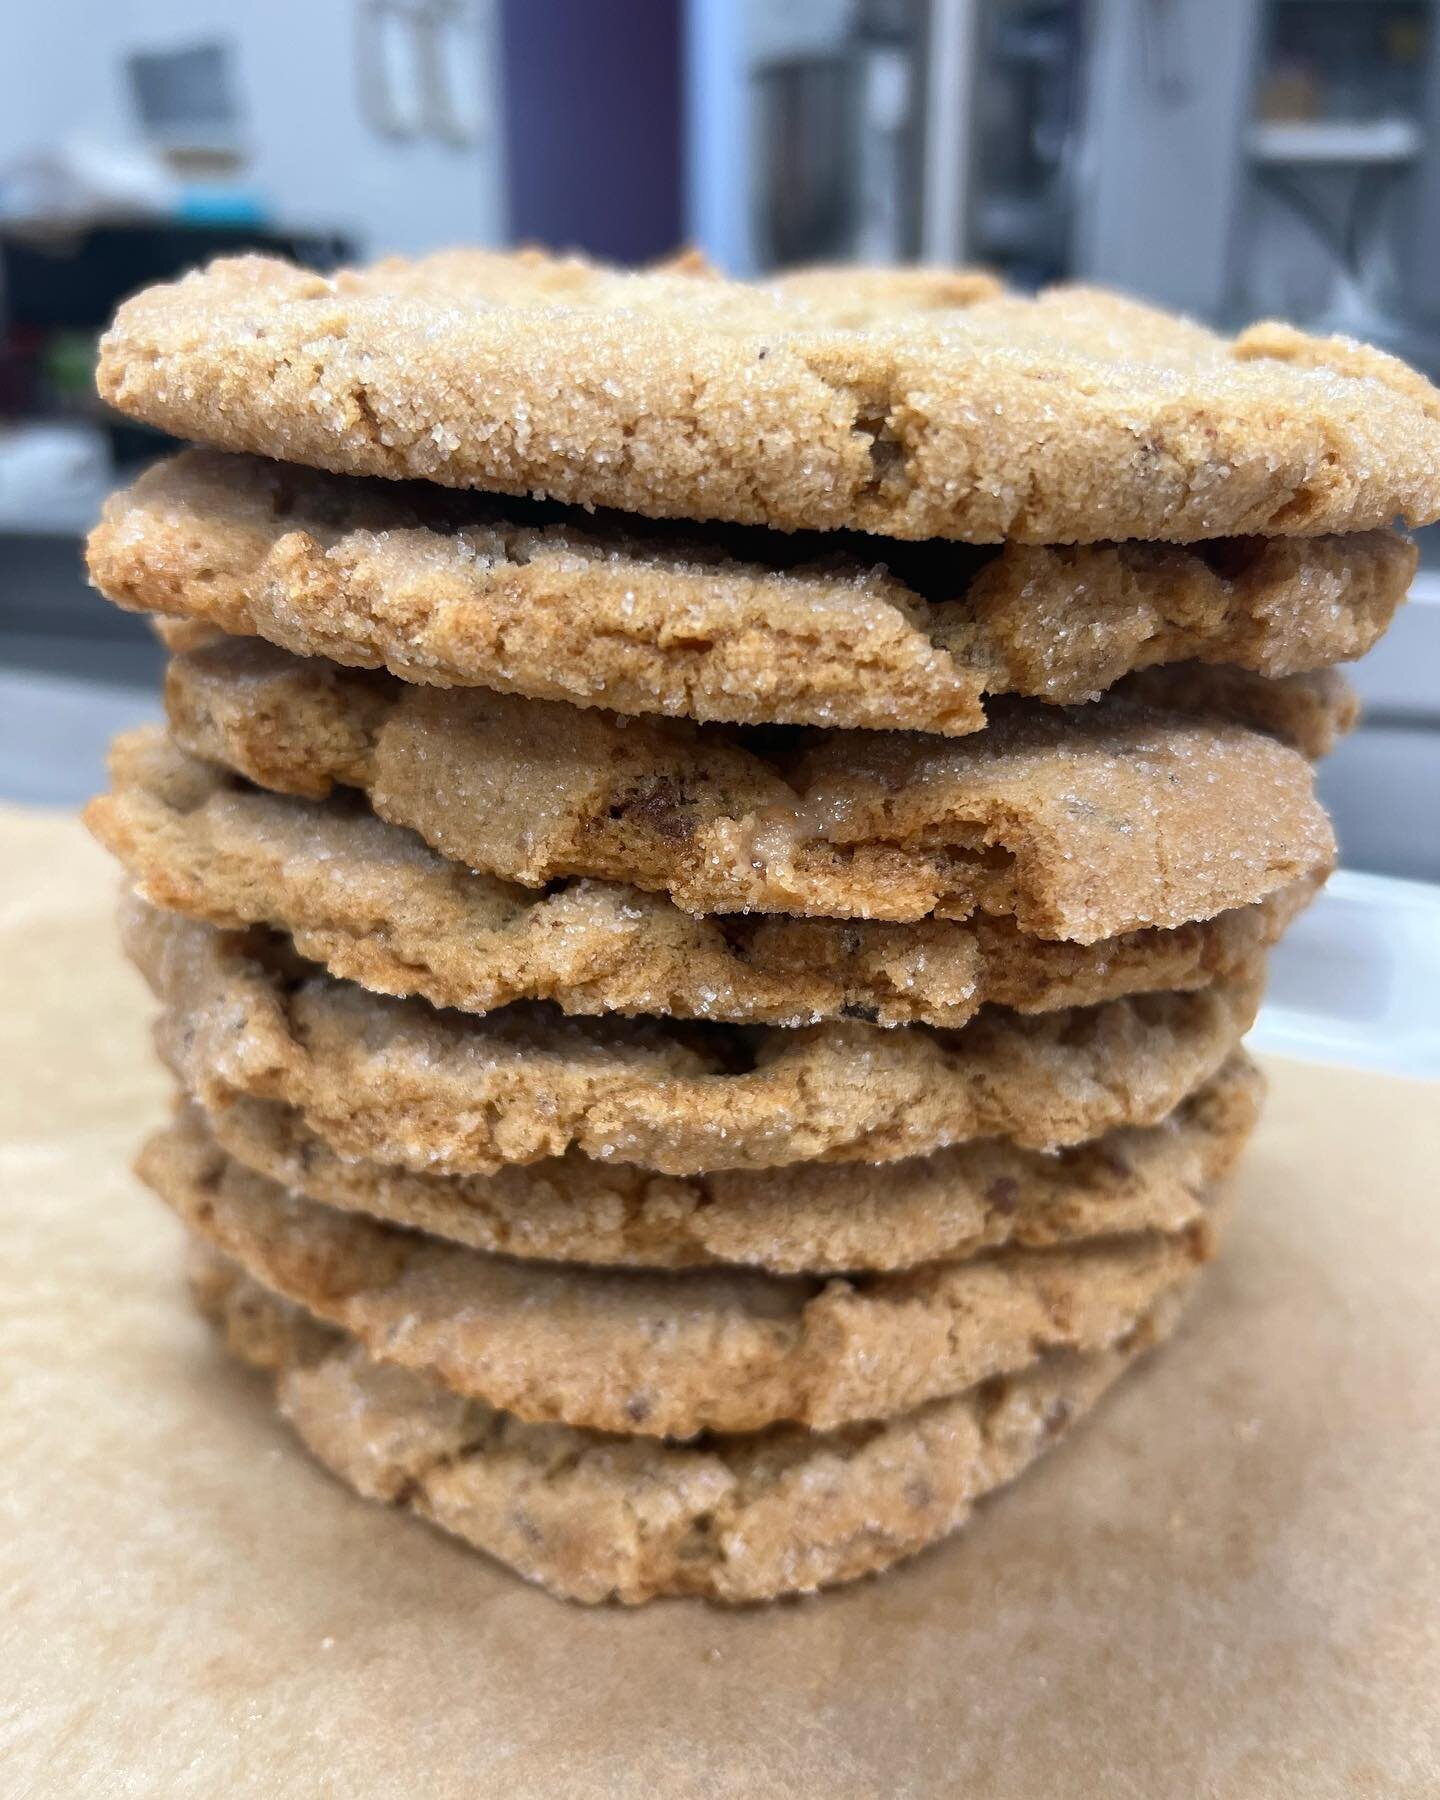 🍪 Indulge in Pure Bliss: Our Signature Brown Butter Maple Toffee Cookies! 🍁🧈

Menu for Tuesday, May 16

Cookies/Bars:
Brown Butter Maple Toffee Cookies
S&rsquo;mores Bars

Treats:
Lime Bars 
Mixed Berry Crumb Bars
Pecan Bars
S&rsquo;mores Devil Do